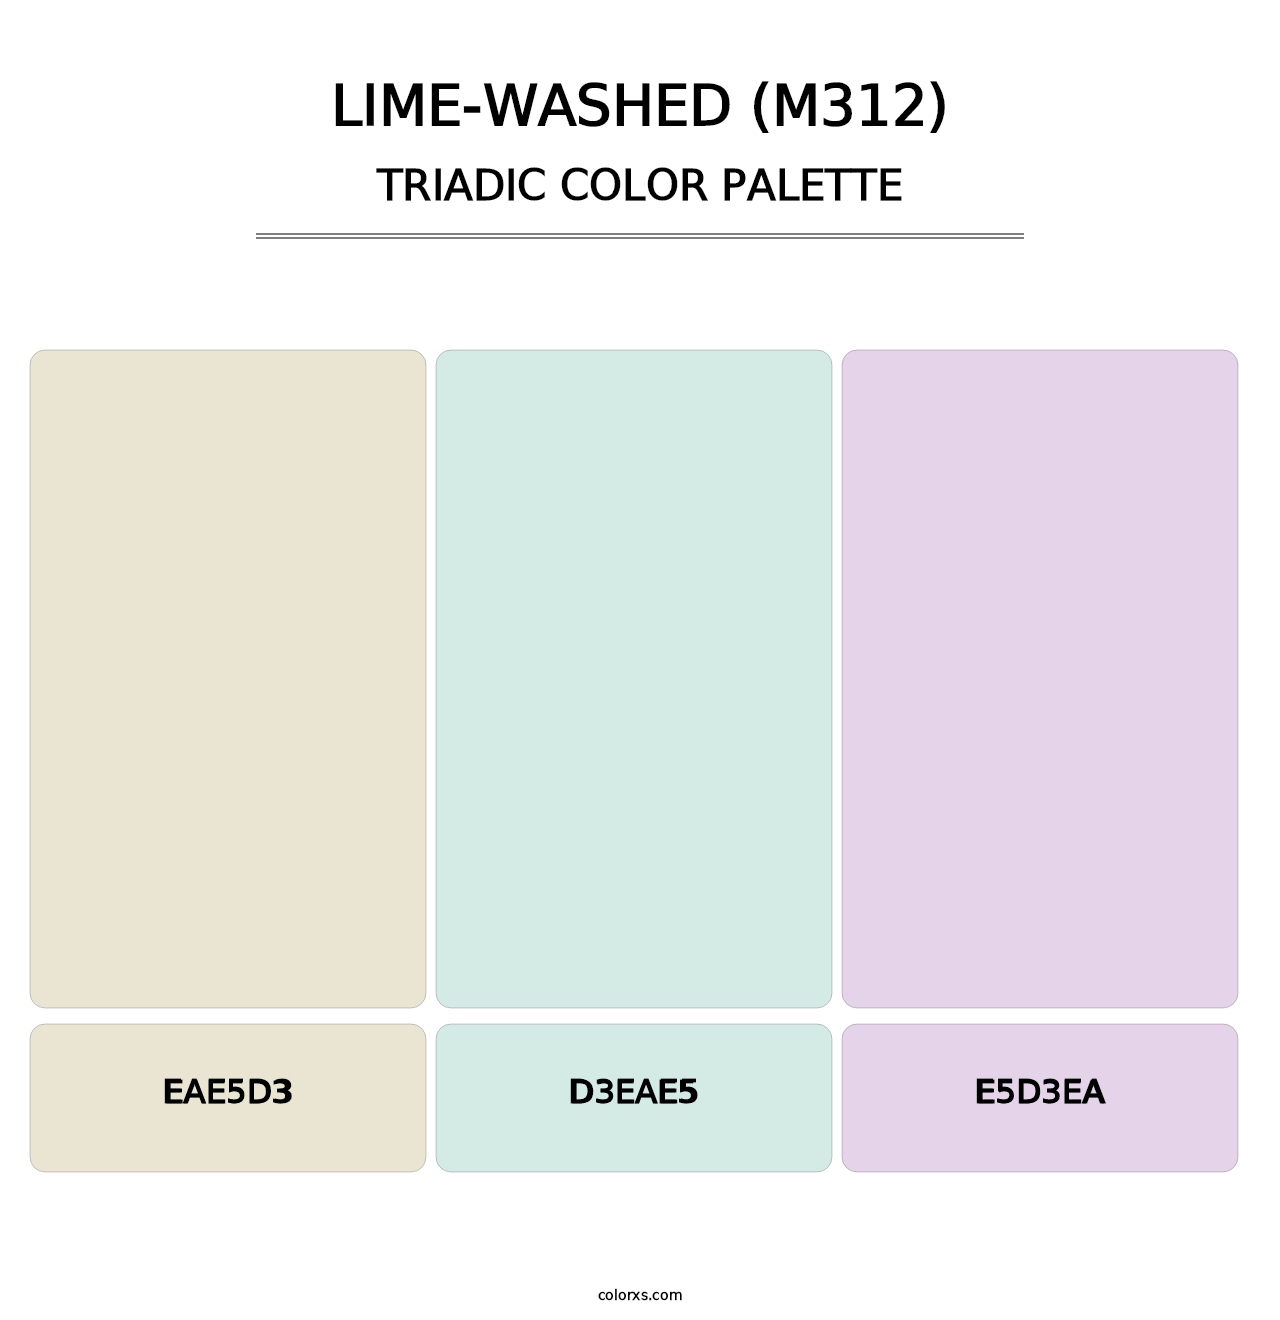 Lime-Washed (M312) - Triadic Color Palette